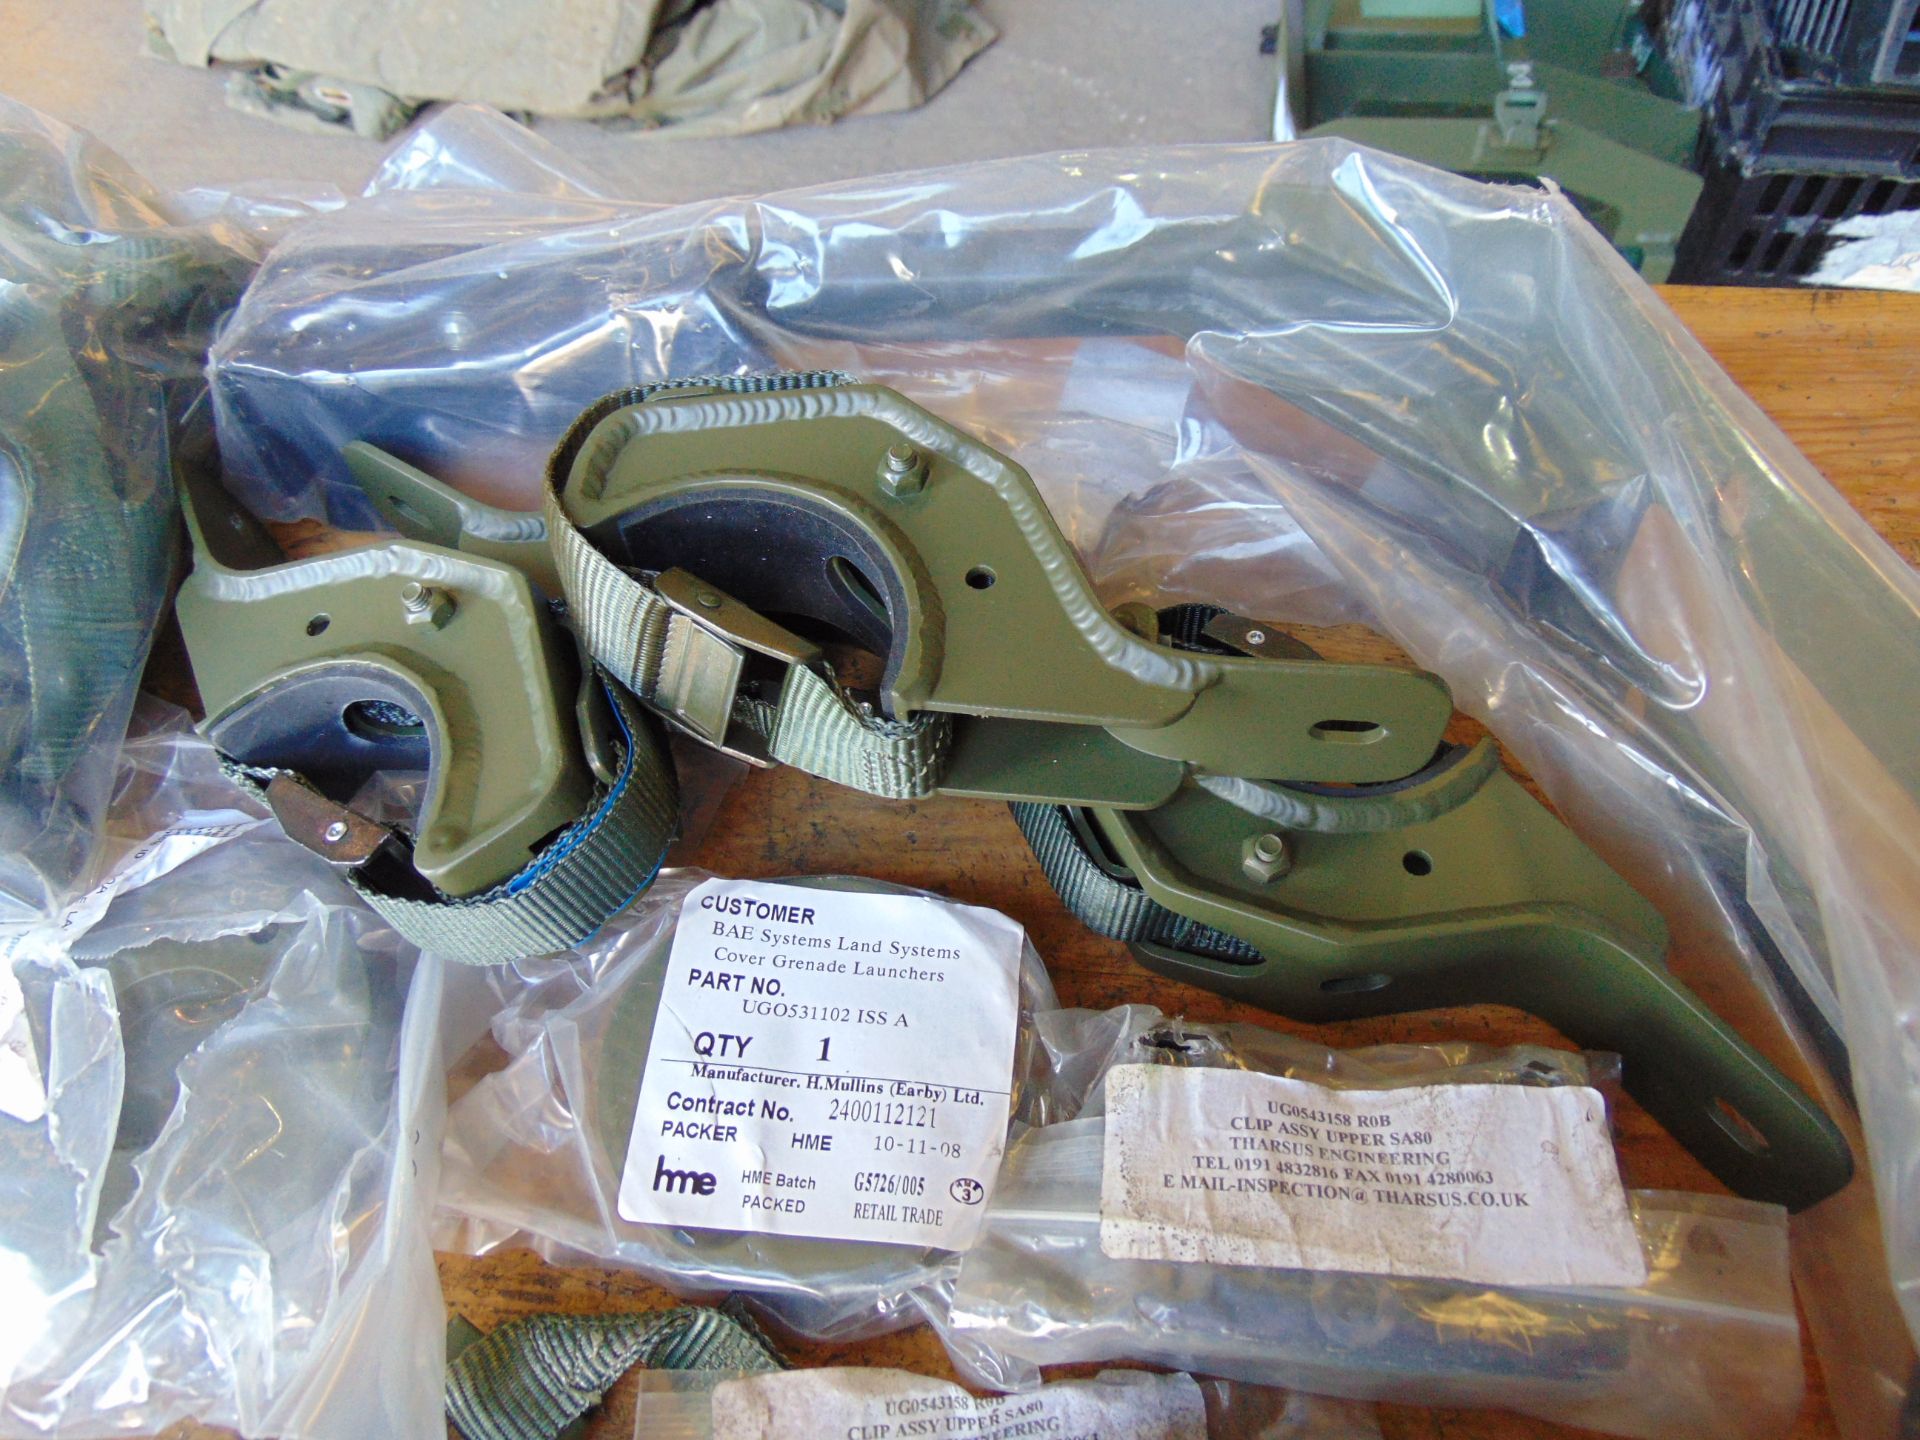 New Unissued WIMIK SA 80 Clips Launcher Covers, Stowage Straps, Barrel Clamps etc - Image 5 of 9